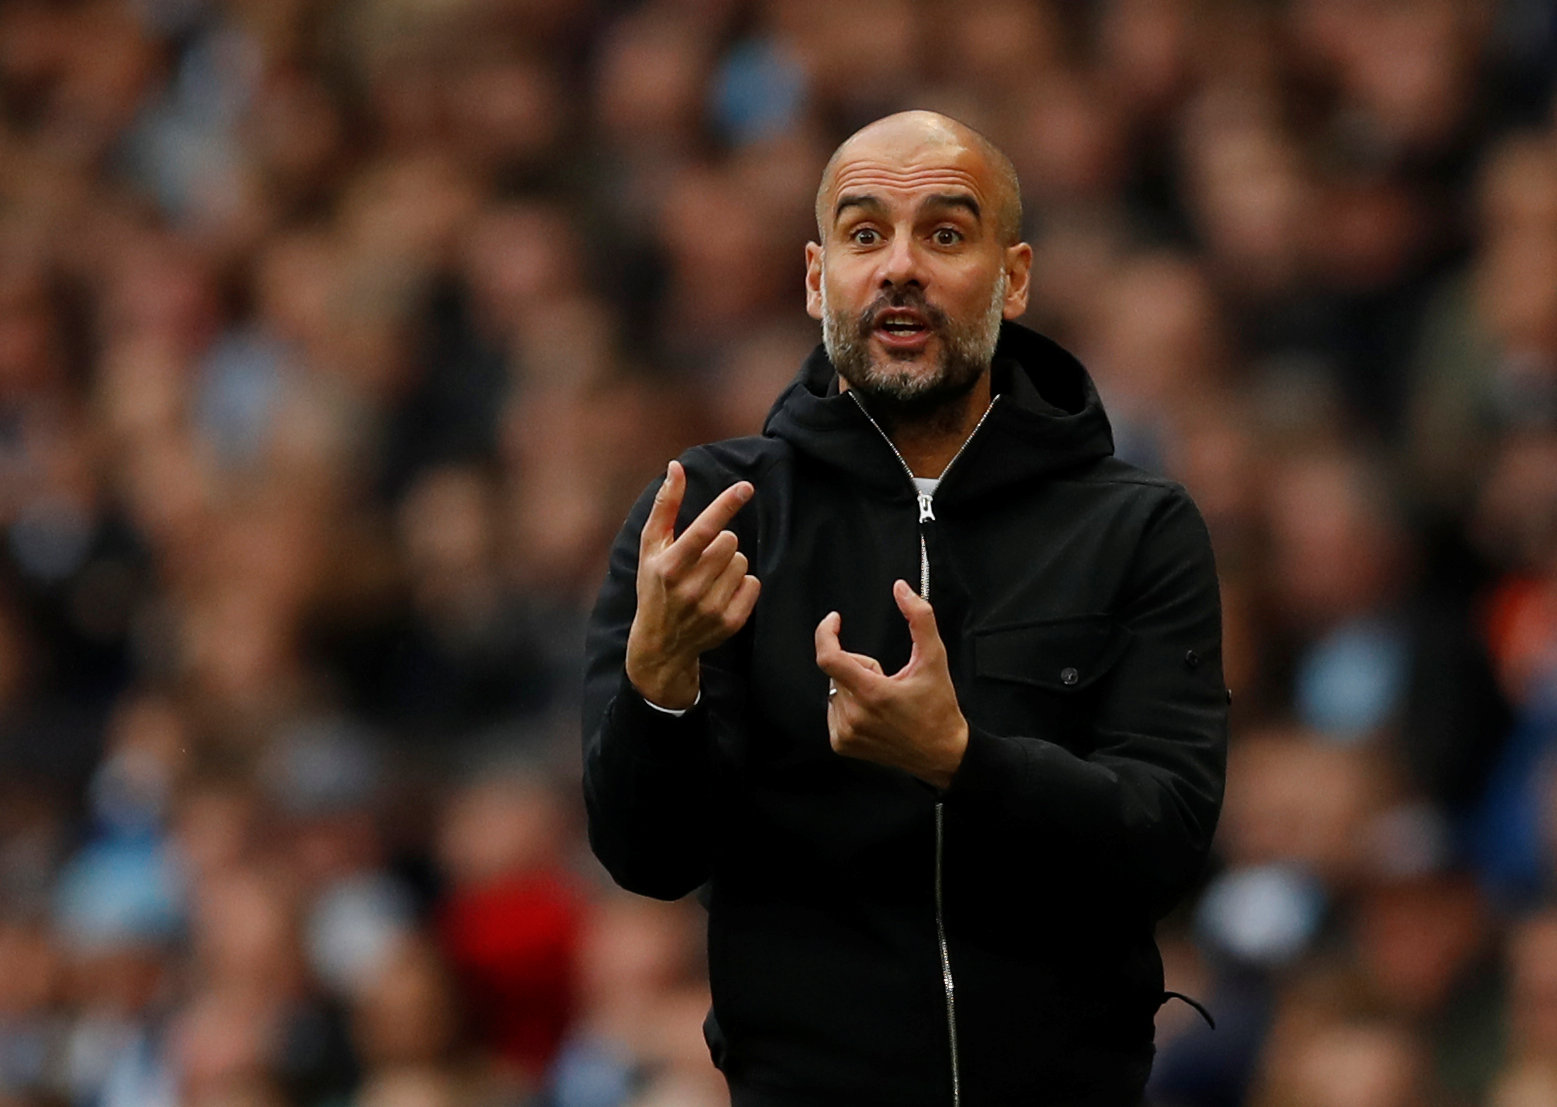 Football: 'Ridiculous' to suggest City can end season unbeaten, says Guardiola